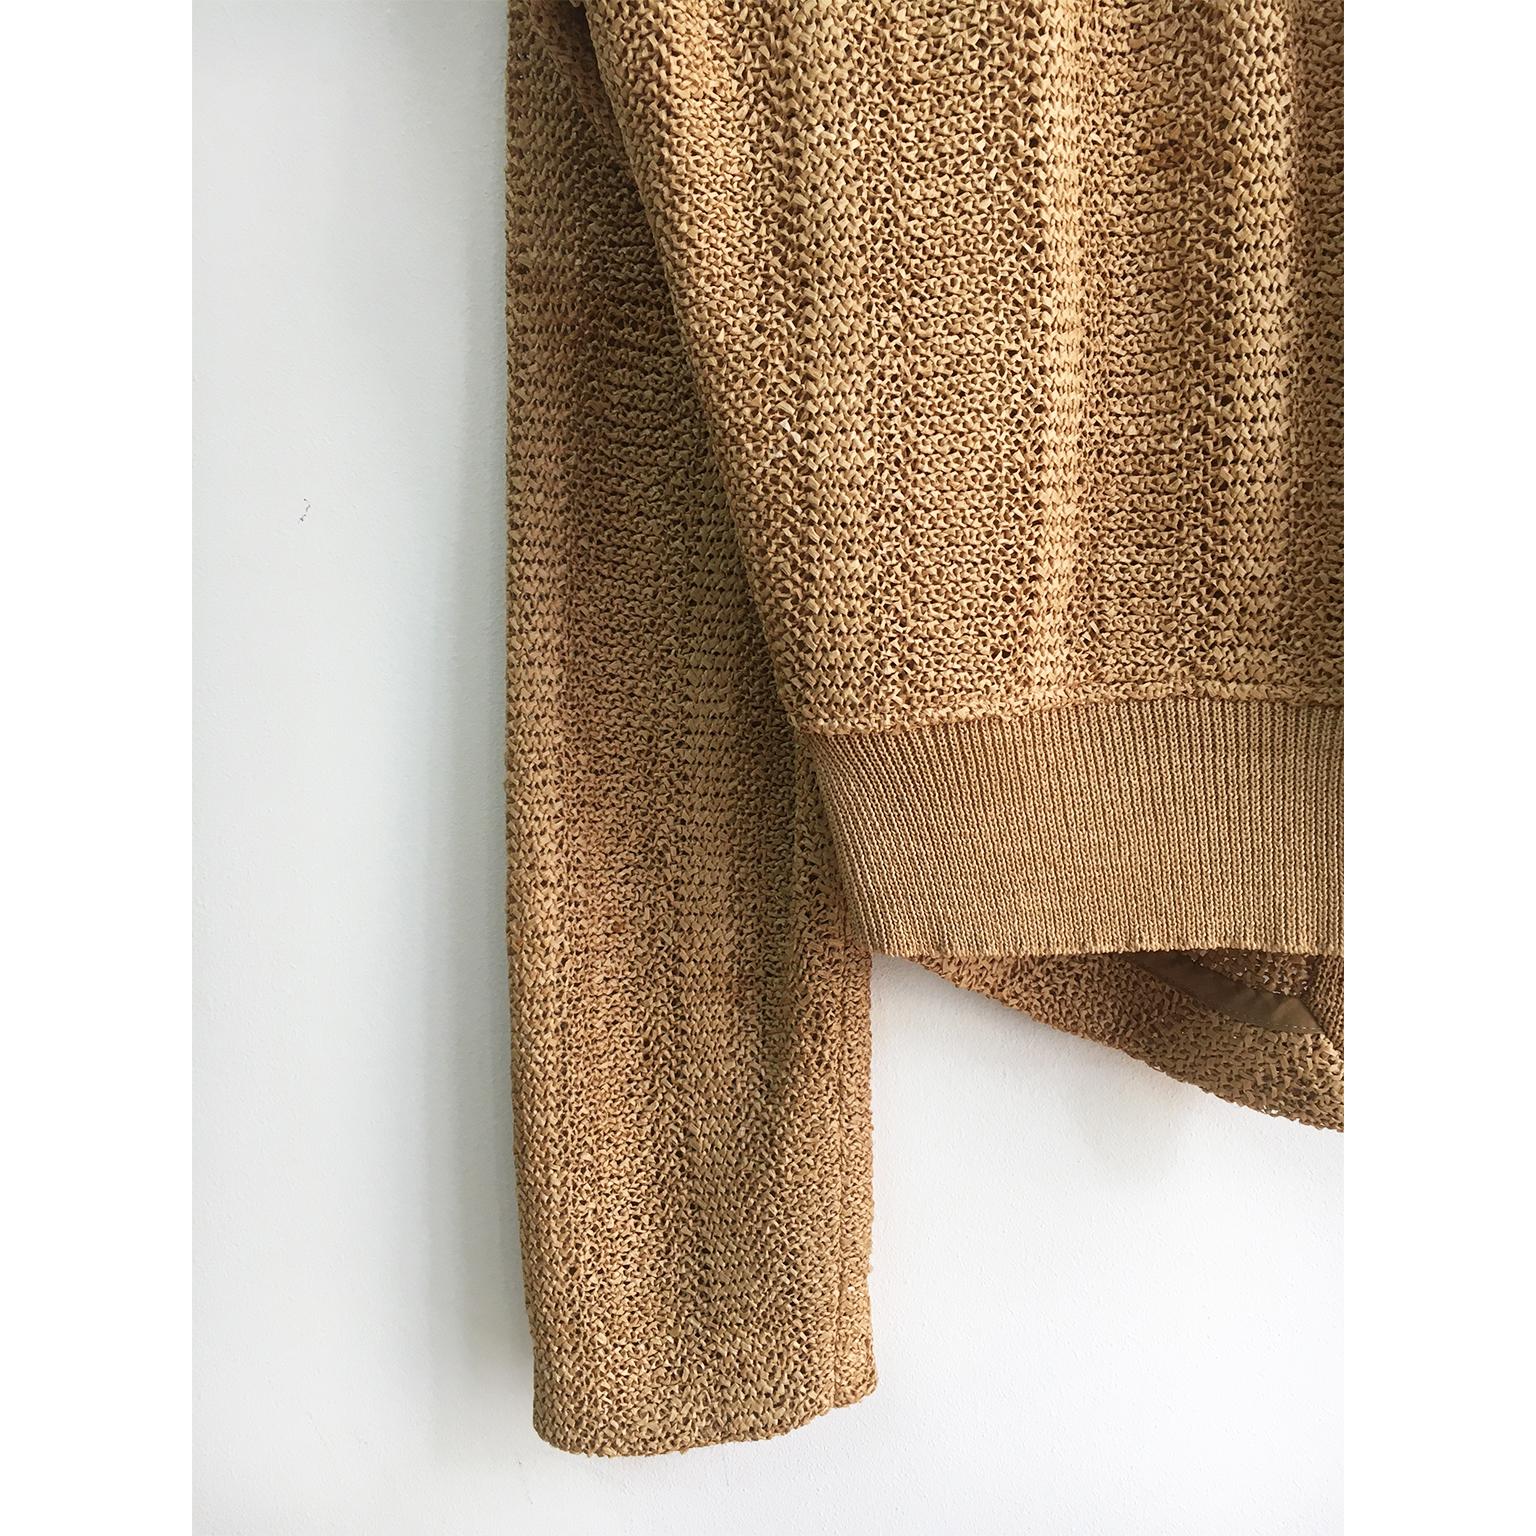 Issey Miyake Tan Straw Knit Beige Cardigan early 90s For Sale 2